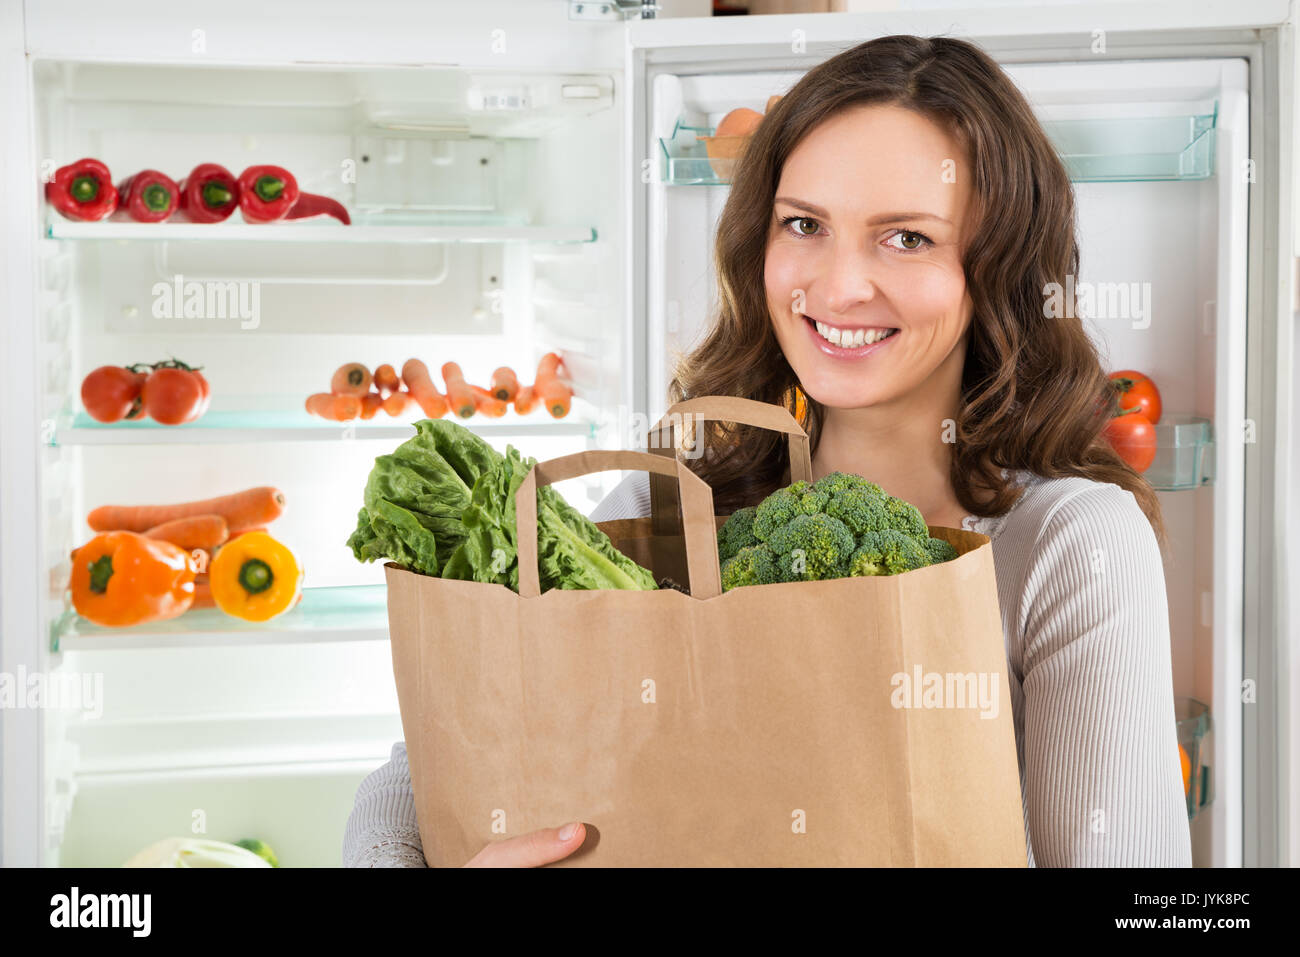 Happy Woman Holding Grocery Shopping Bag With Vegetables In Front Of Open Refrigerator Stock Photo